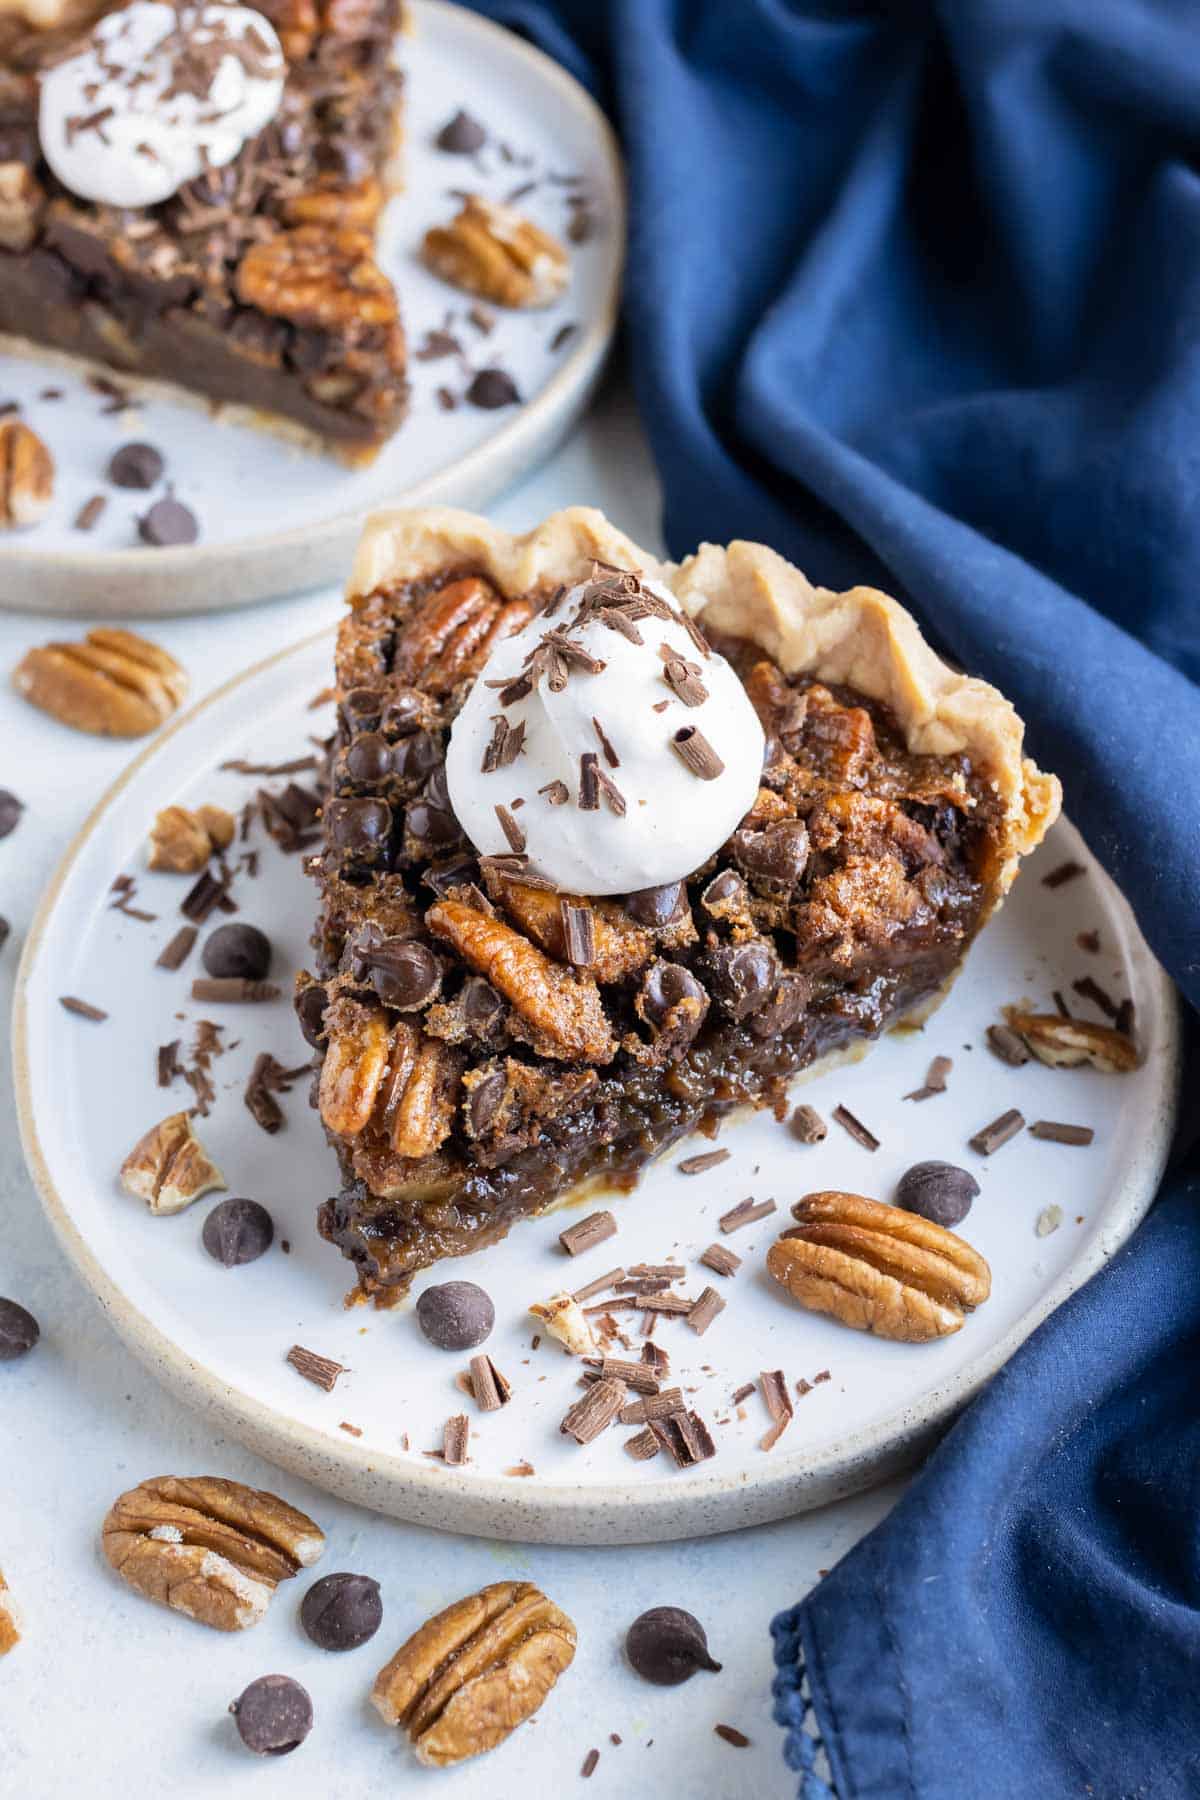 A dollop of whipped cream is put on a slice of pecan pie.